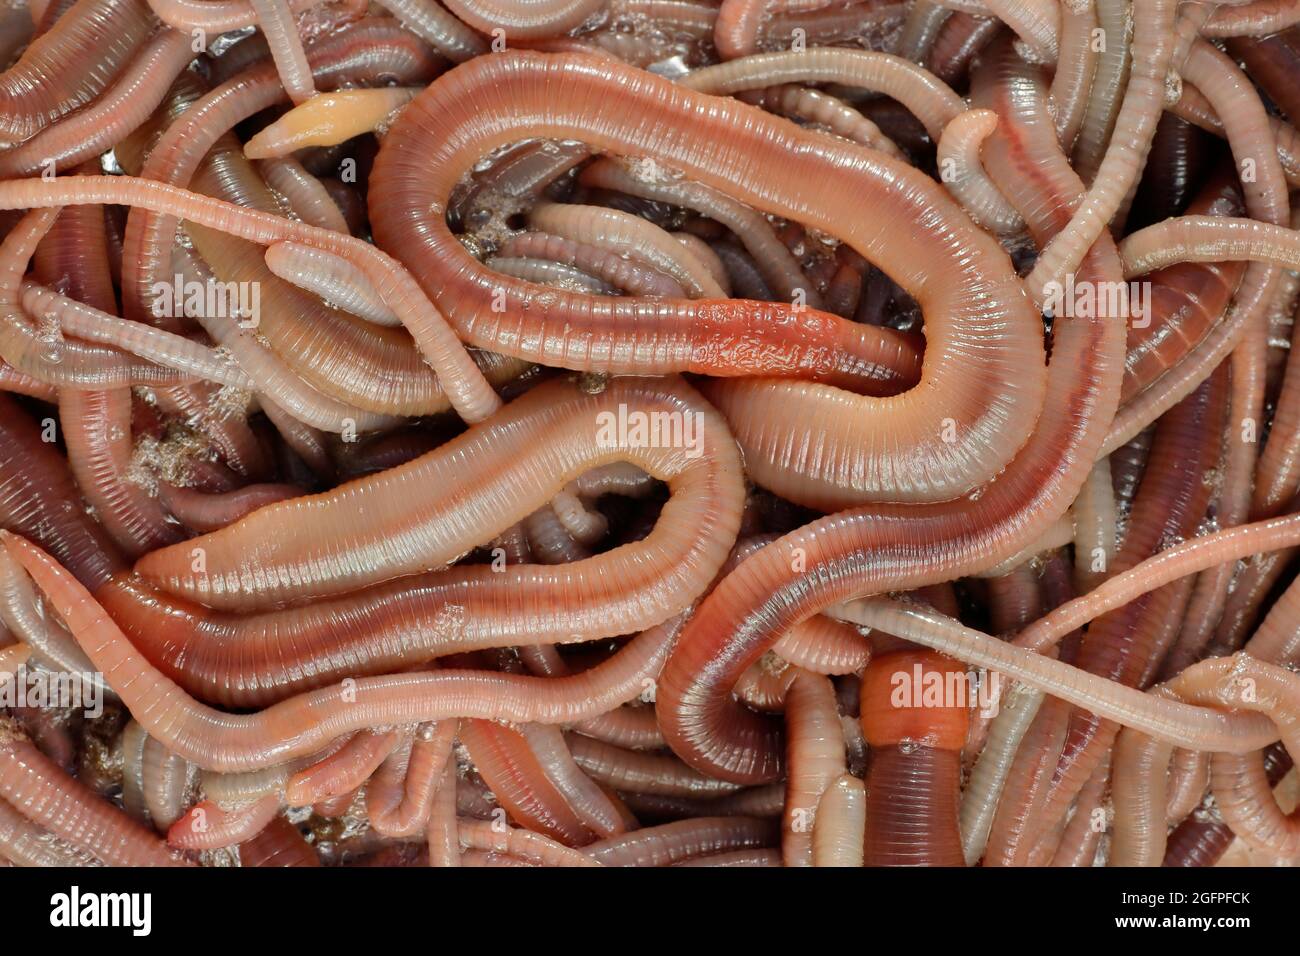 Earthworms for loosening the soil and for bait fishing. Top view